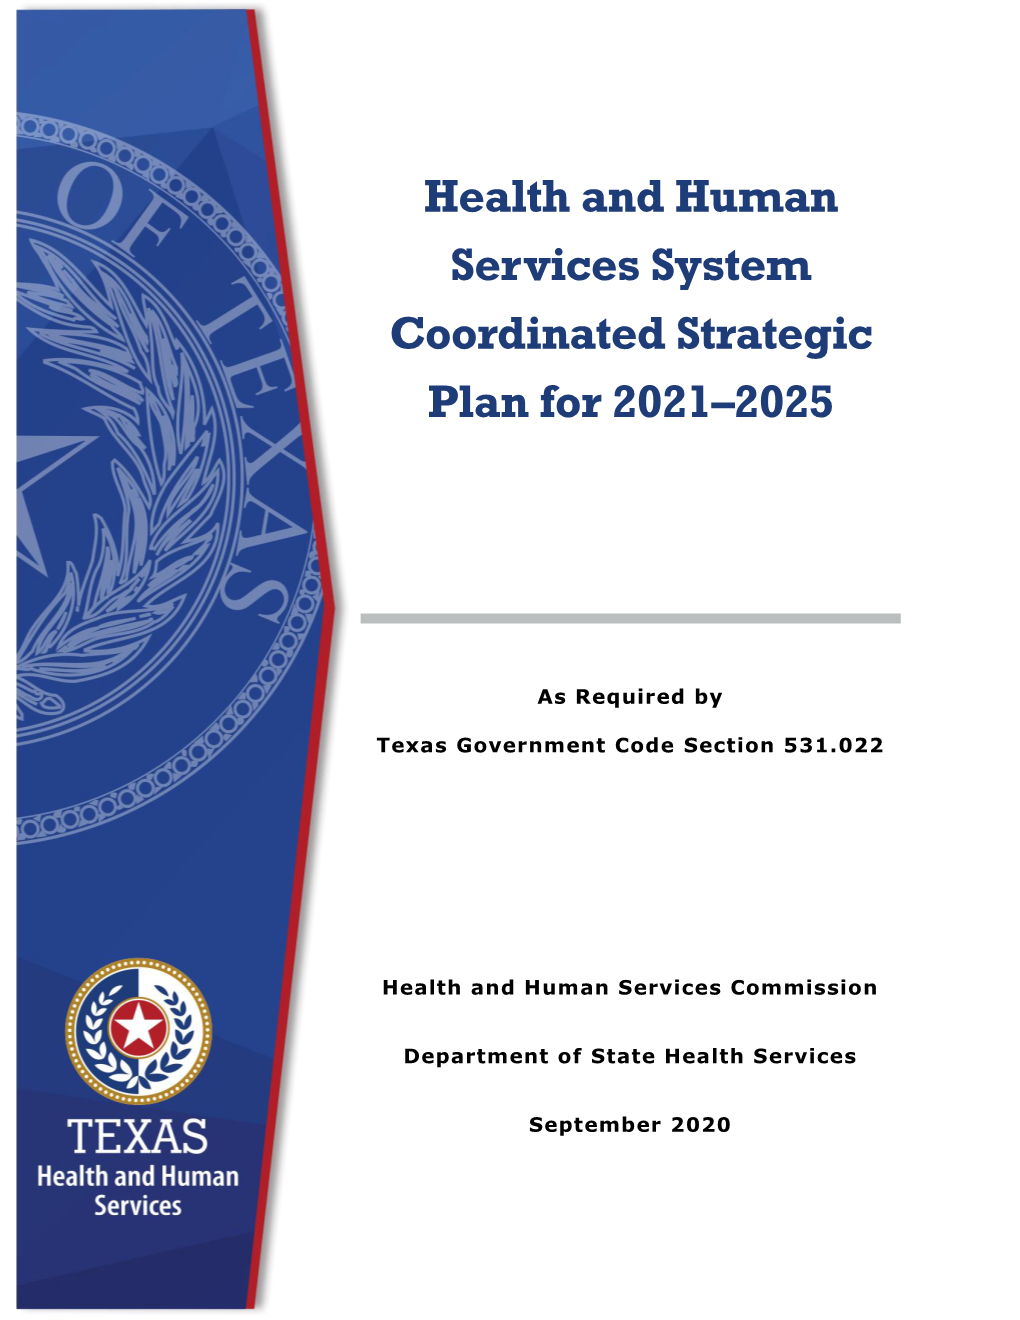 HHS System Coordinated Strategic Plan for 2021-2025